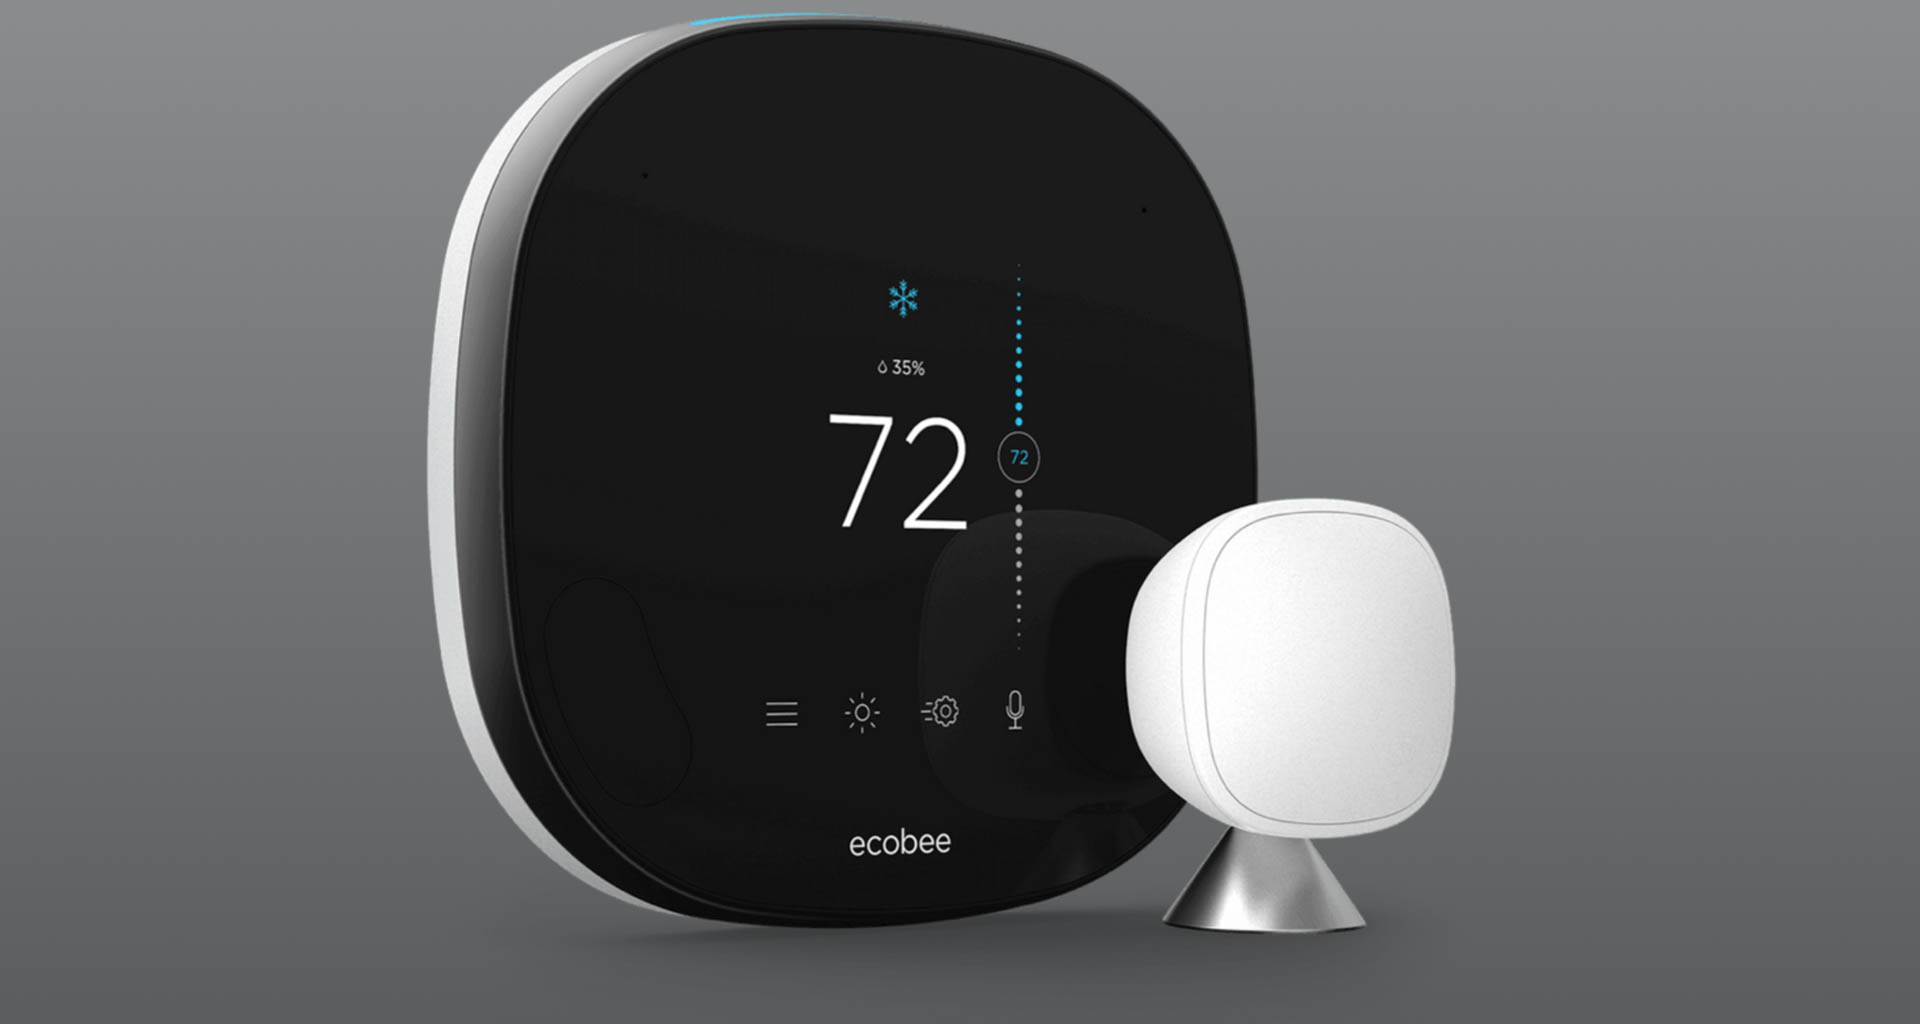 Smart thermostats are one of the best places to begin with automating your home and work space as well as saving on energy bills. Image: ecobee.